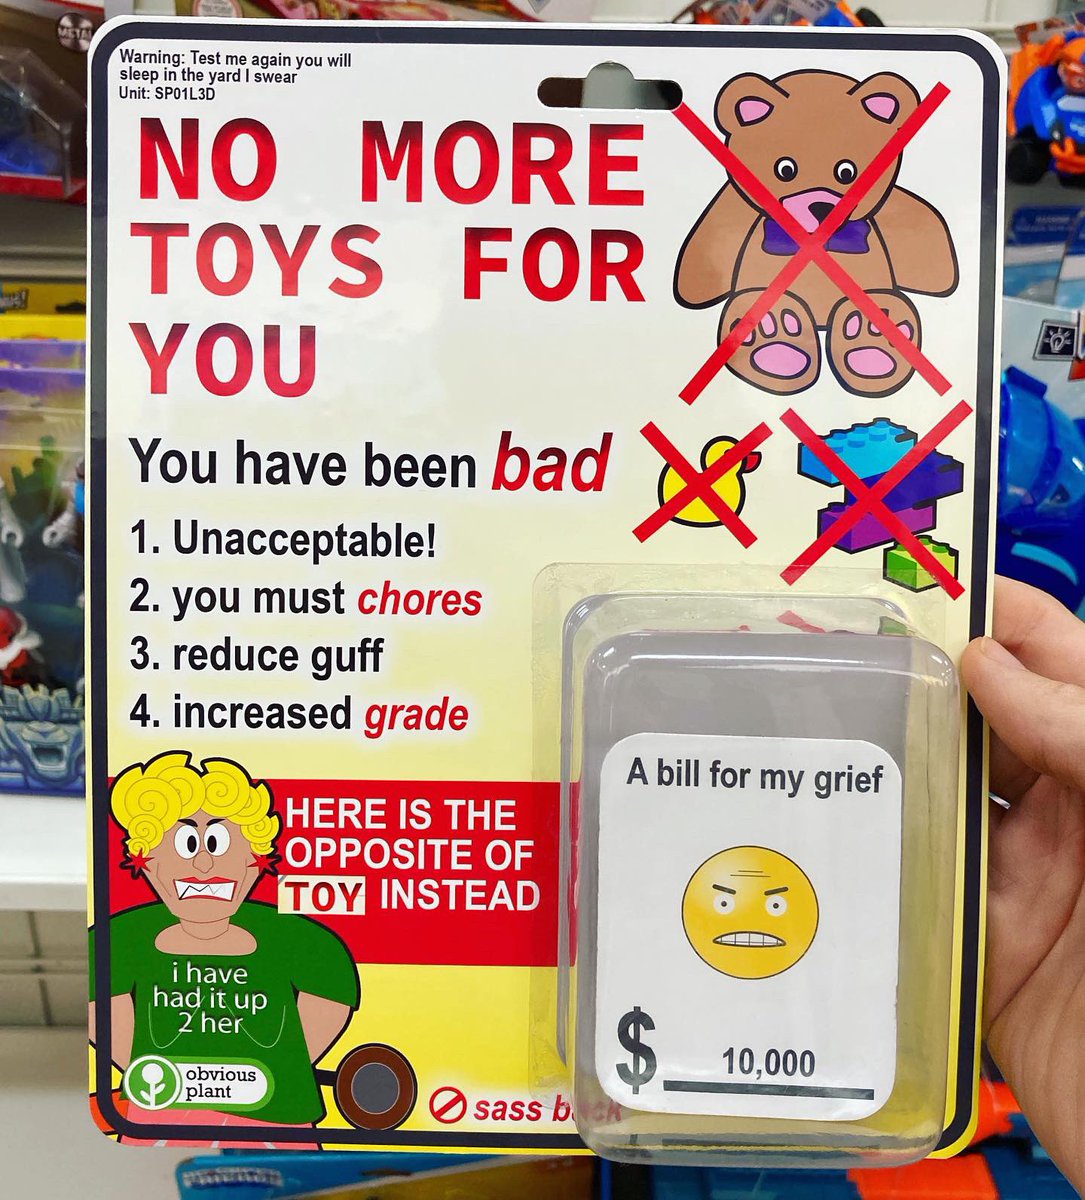 Obvious Plant's No more toys for you